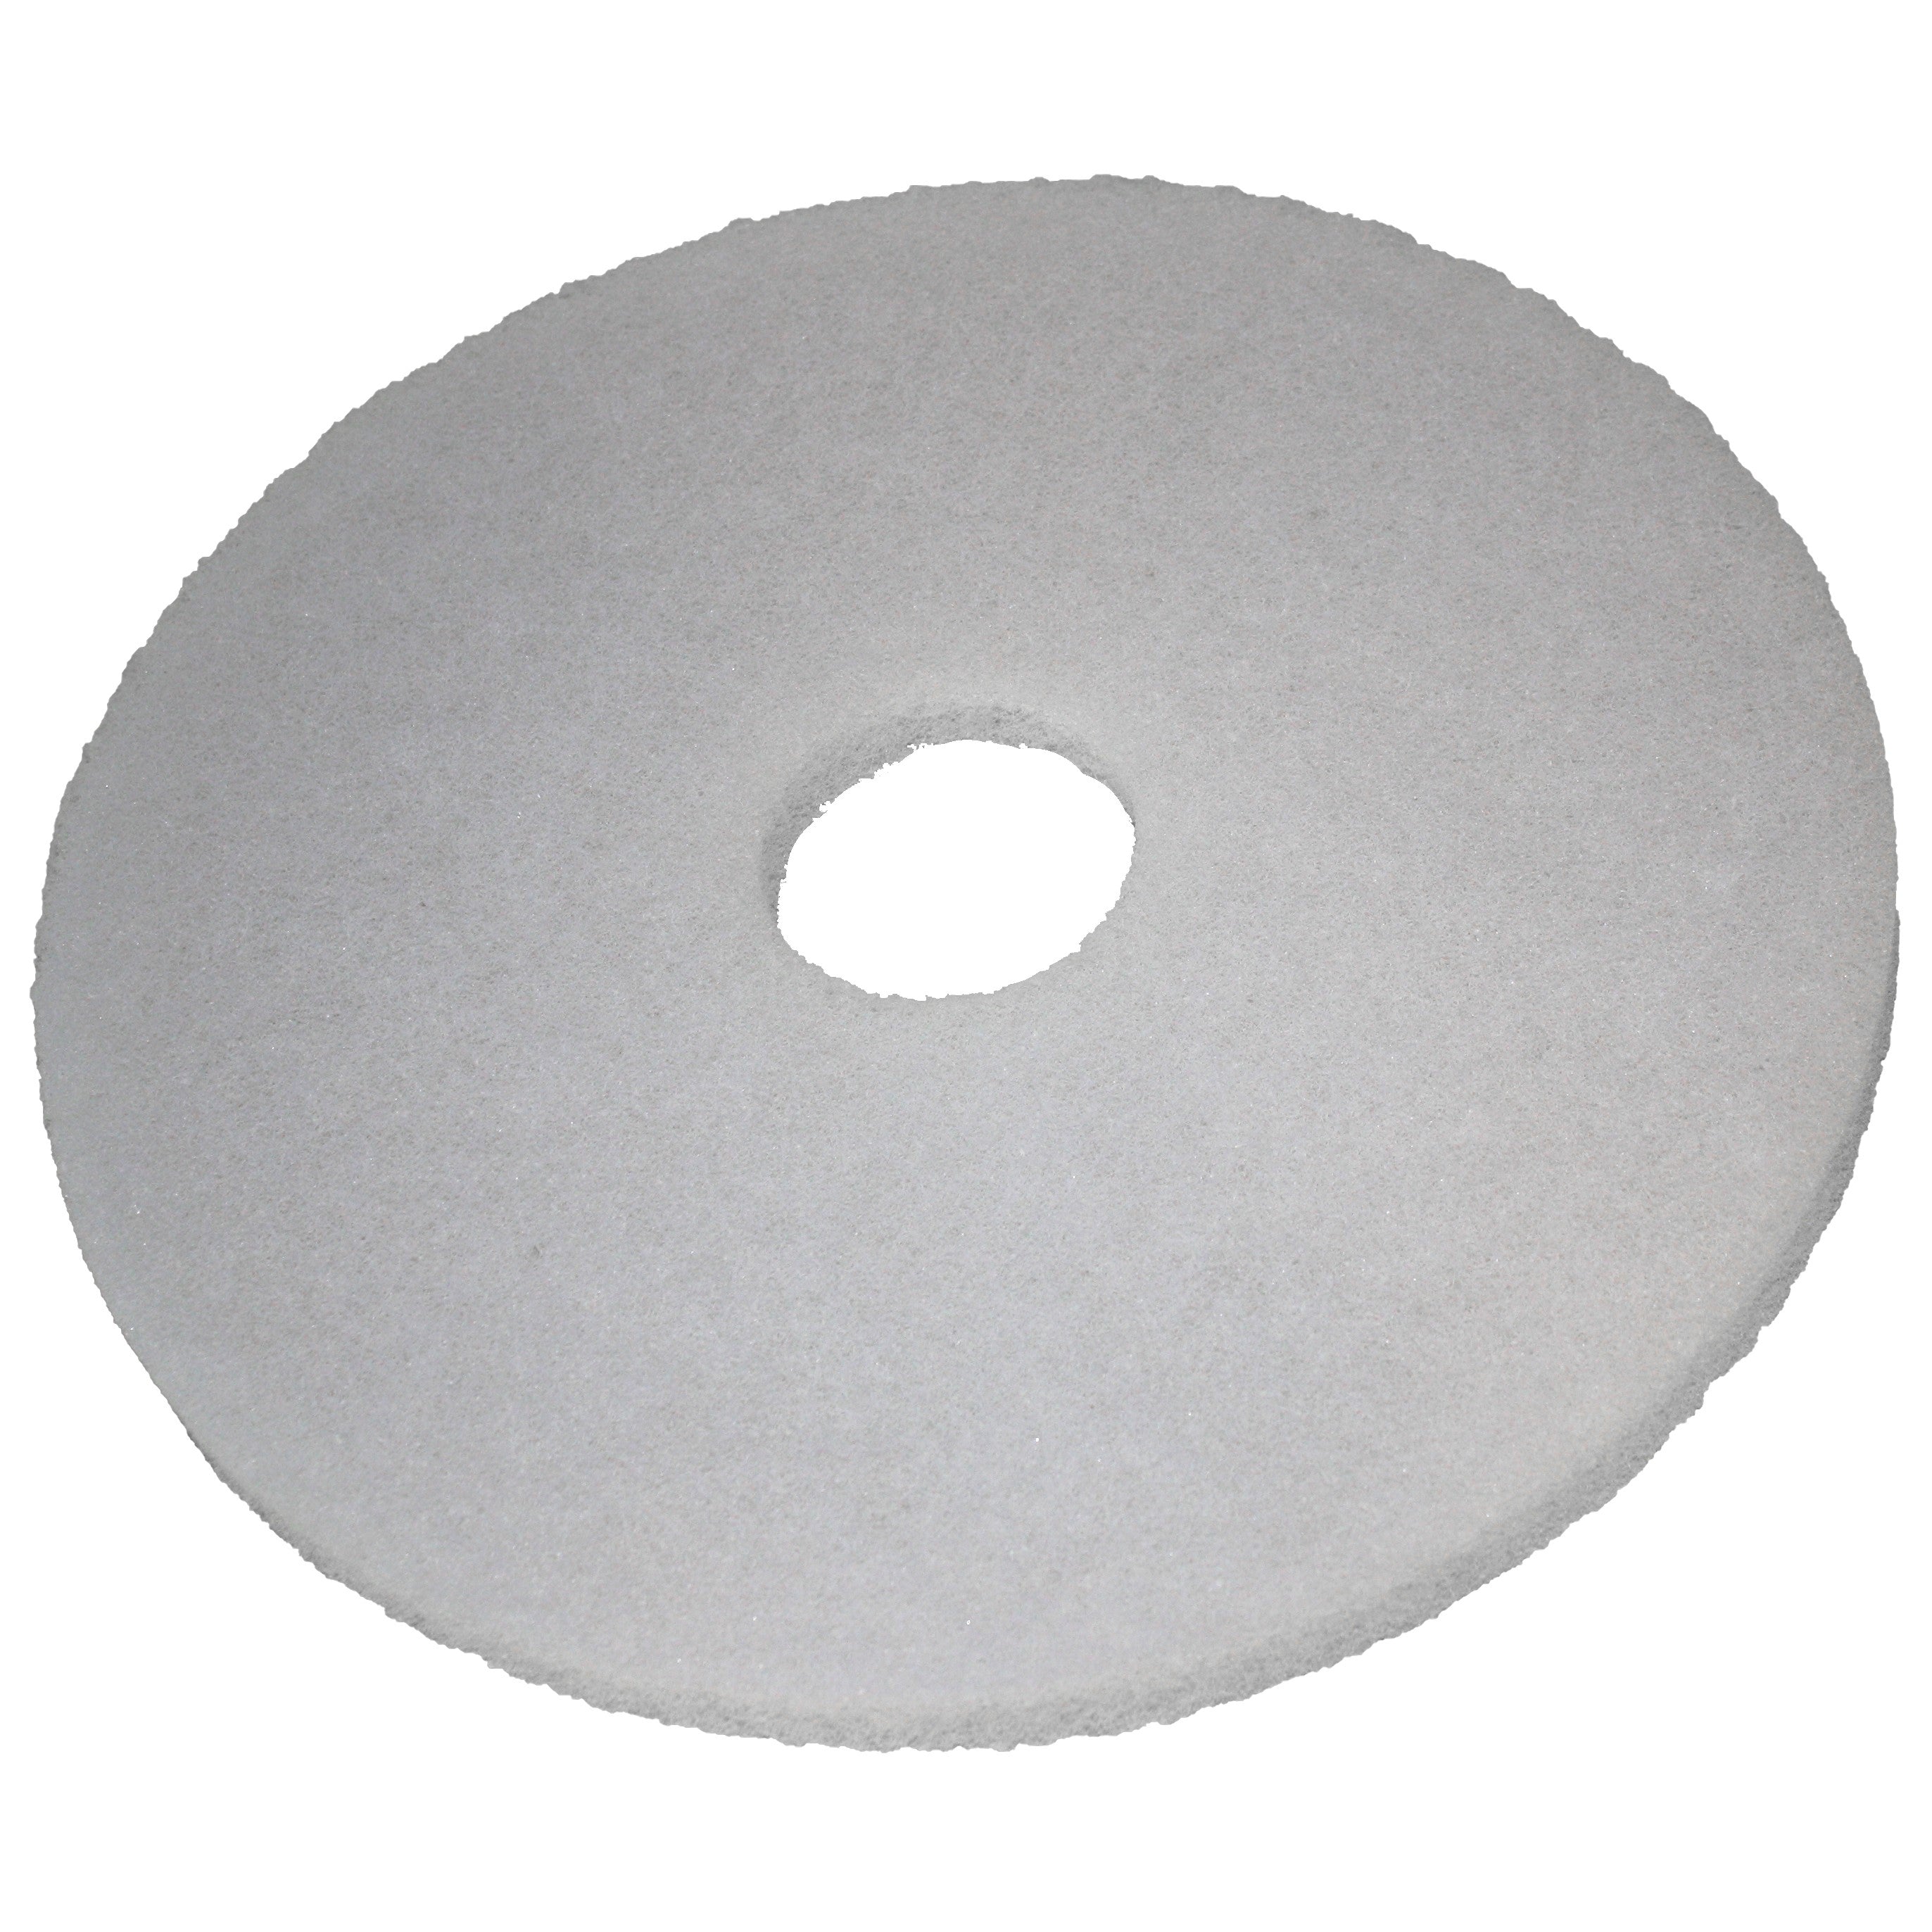 Pad weiss, Ø 532 mm, Polyester